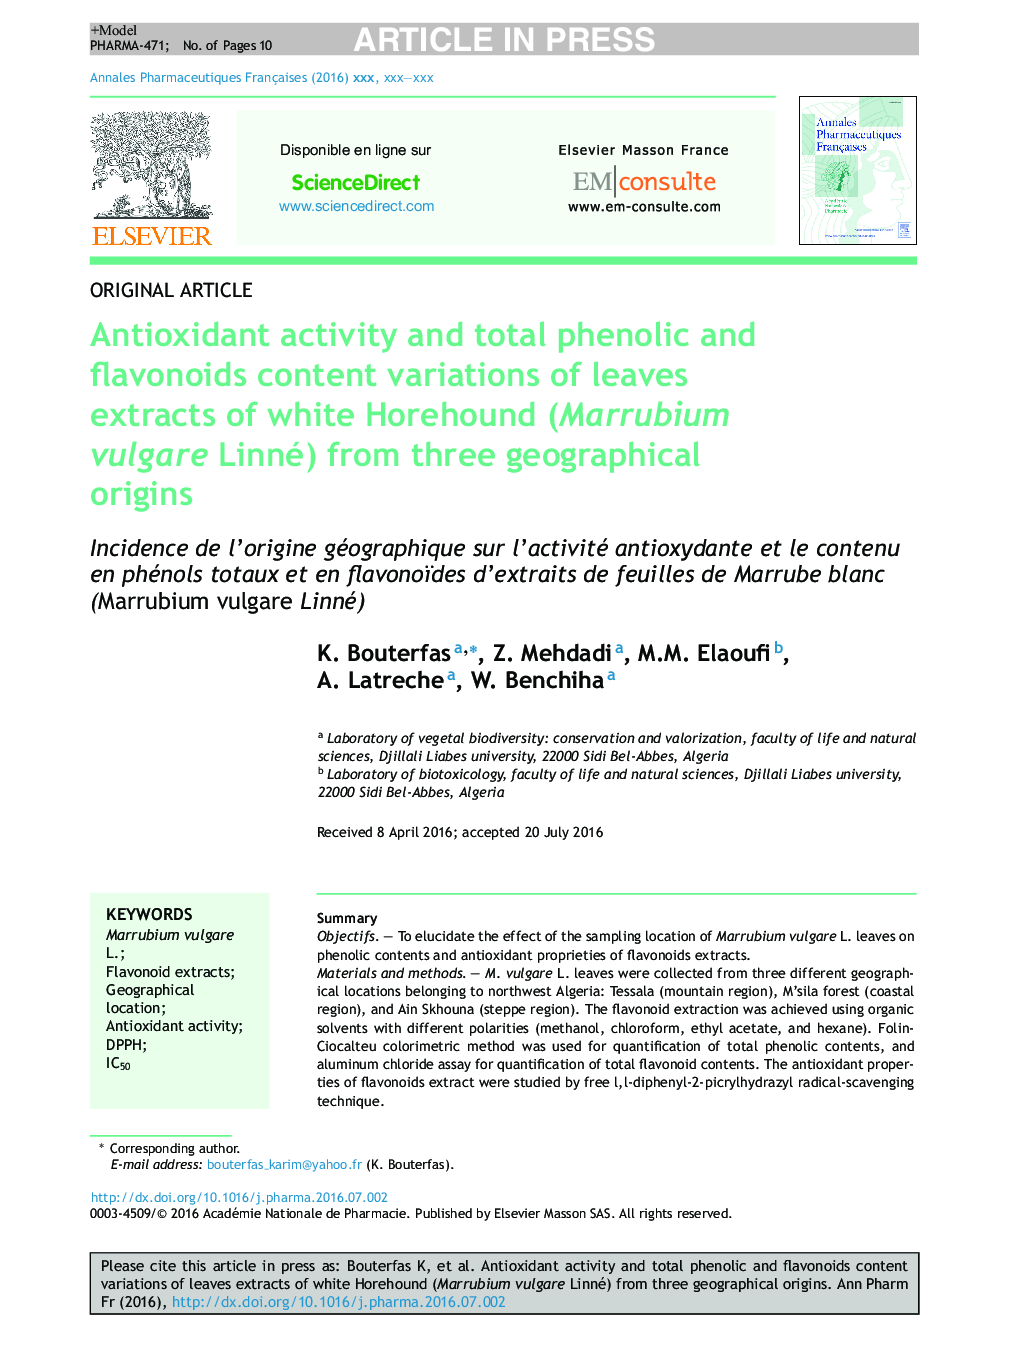 Antioxidant activity and total phenolic and flavonoids content variations of leaves extracts of white Horehound (Marrubium vulgare Linné) from three geographical origins